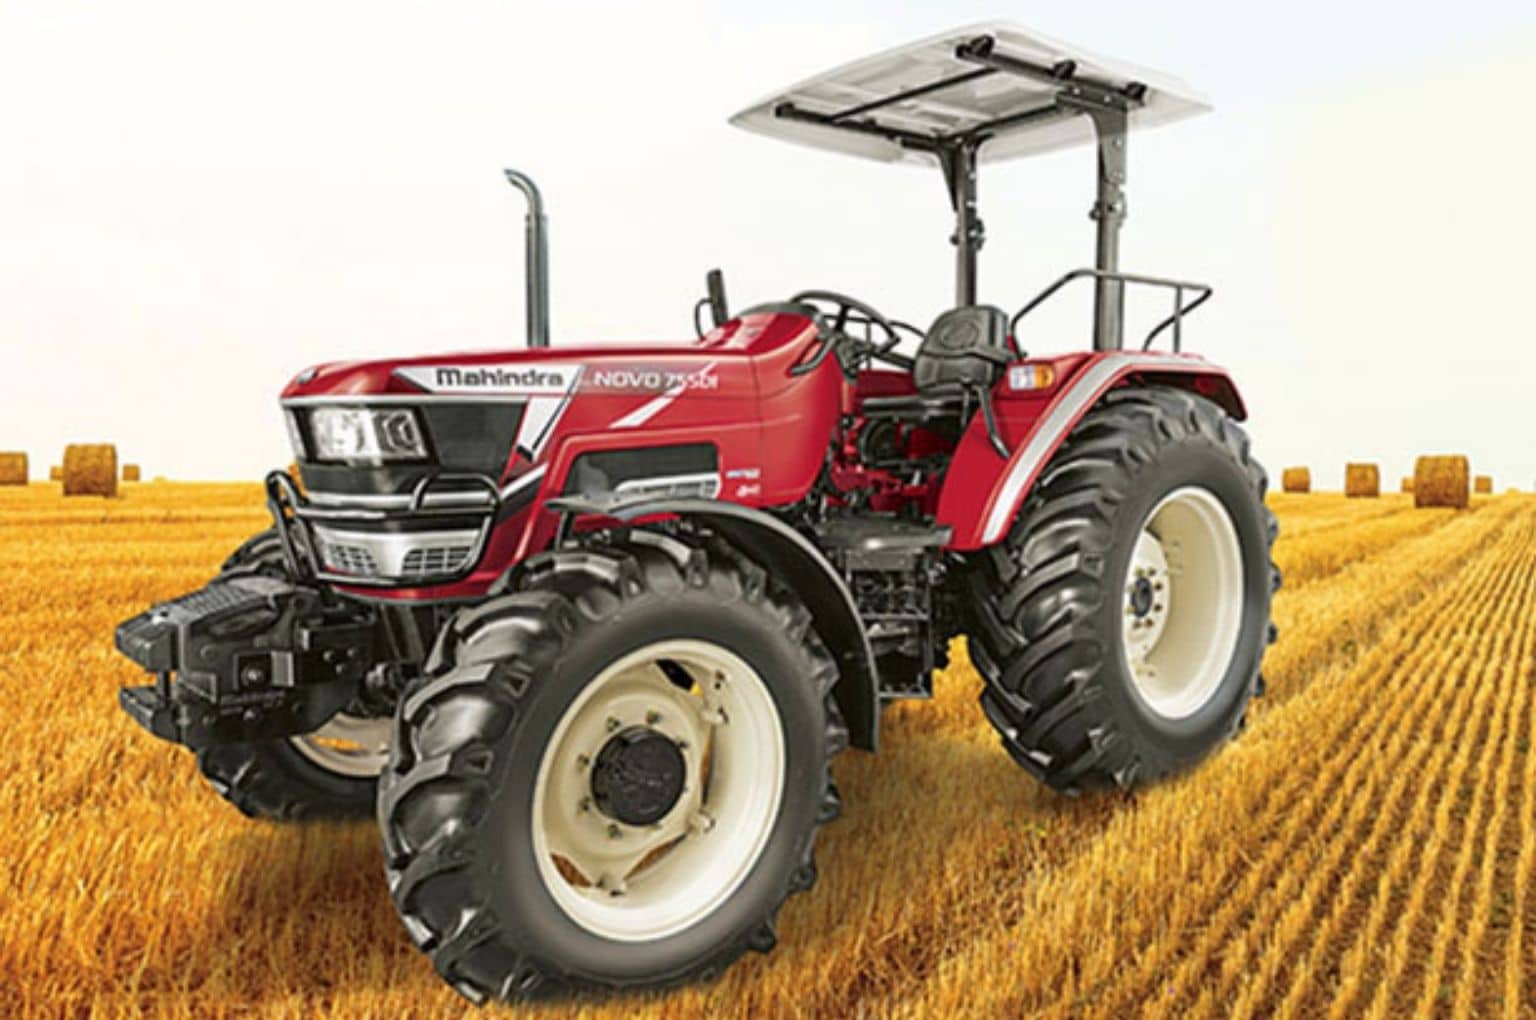 Mahindra reports strong growth for April 2022